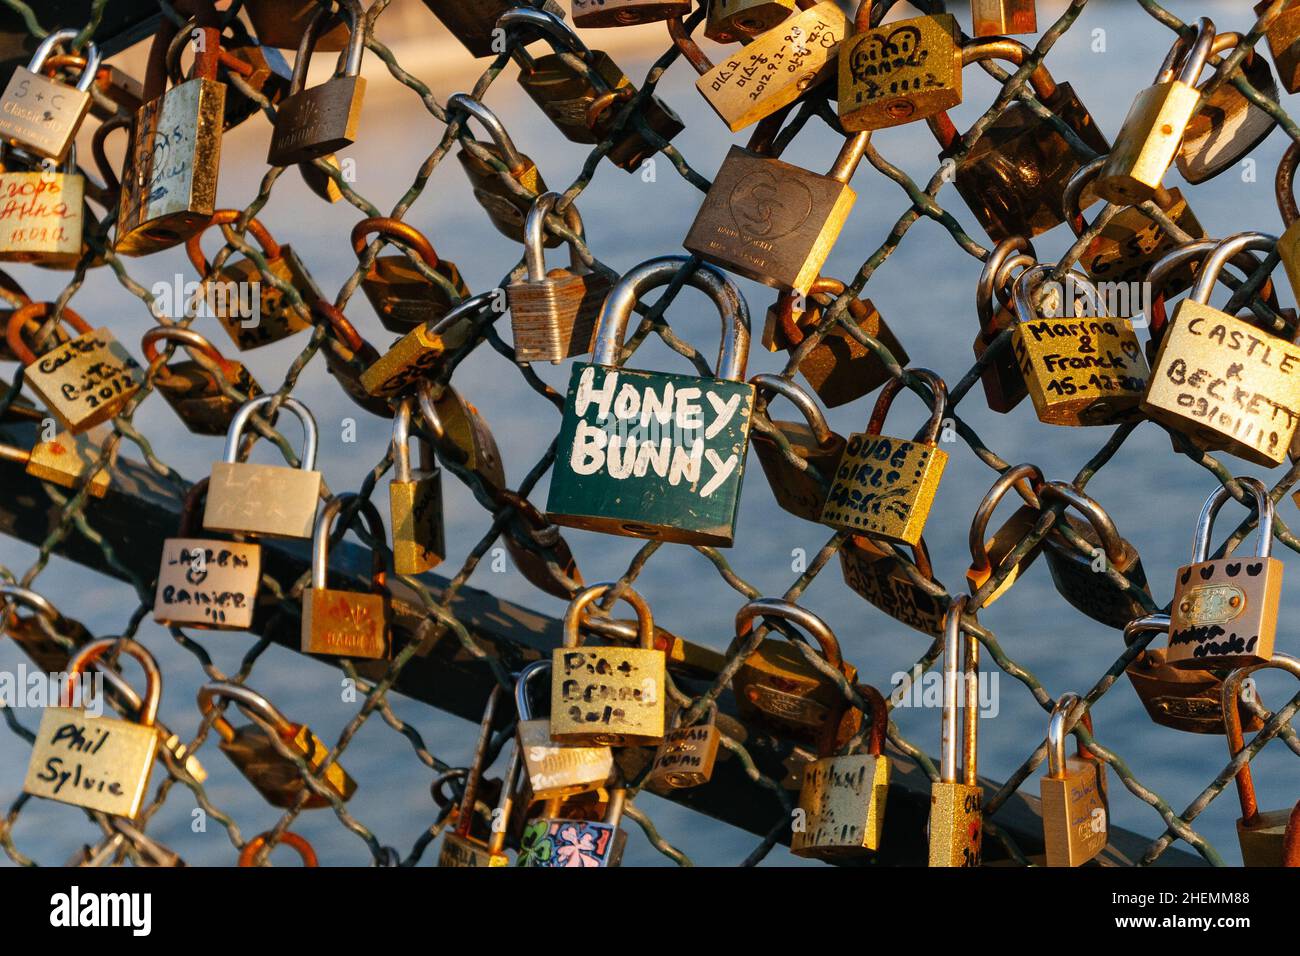 Padlocks with couples names on declaring everlasting love, locked onto the mesh fence of Post des Arts in Paris, France. Stock Photo